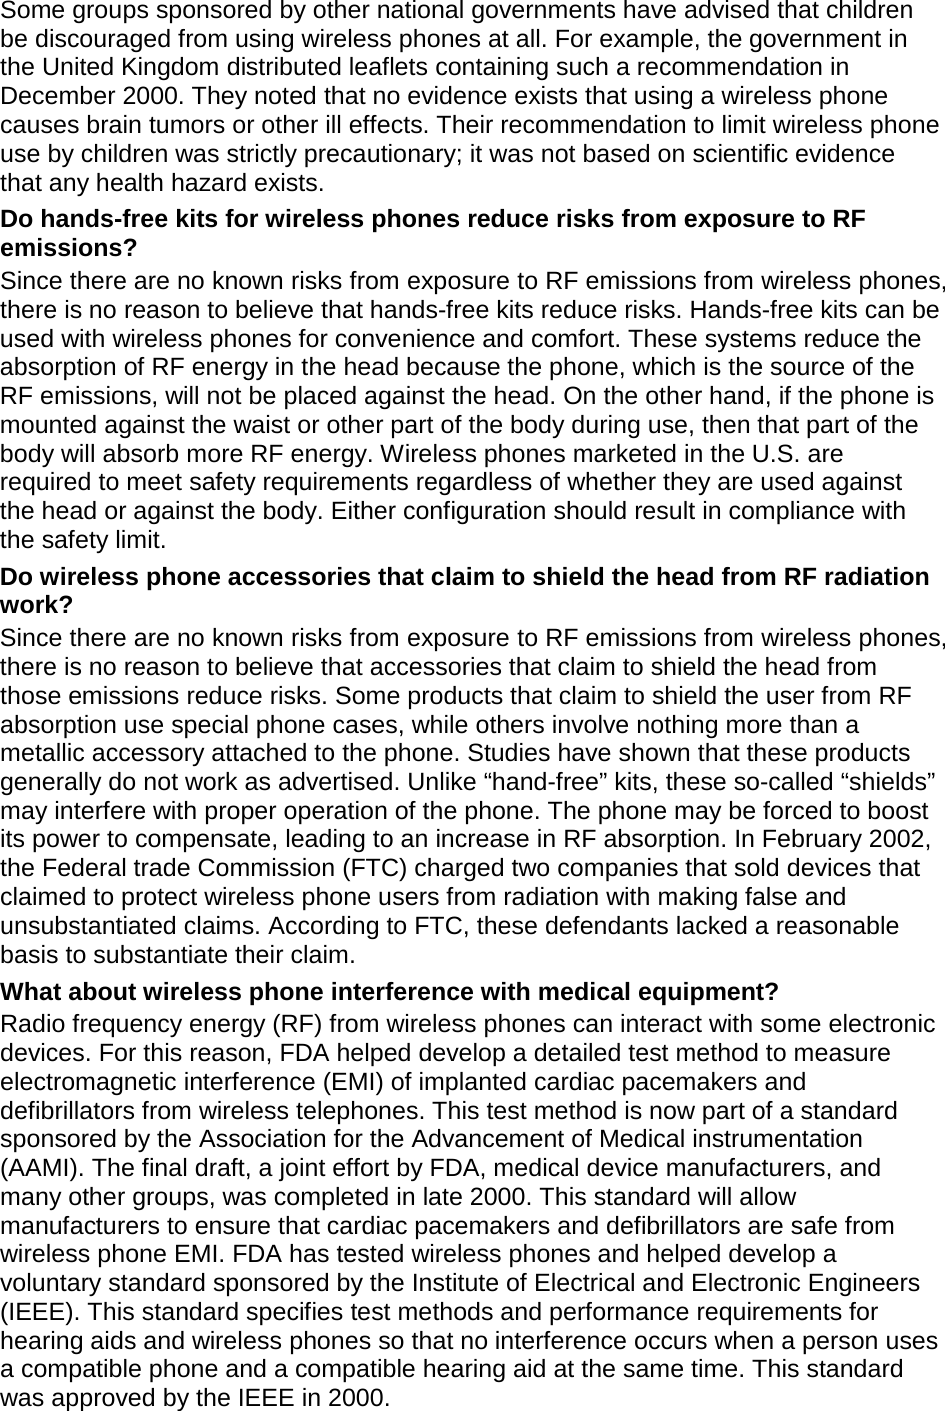 Some groups sponsored by other national governments have advised that children be discouraged from using wireless phones at all. For example, the government in the United Kingdom distributed leaflets containing such a recommendation in December 2000. They noted that no evidence exists that using a wireless phone causes brain tumors or other ill effects. Their recommendation to limit wireless phone use by children was strictly precautionary; it was not based on scientific evidence that any health hazard exists.   Do hands-free kits for wireless phones reduce risks from exposure to RF emissions? Since there are no known risks from exposure to RF emissions from wireless phones, there is no reason to believe that hands-free kits reduce risks. Hands-free kits can be used with wireless phones for convenience and comfort. These systems reduce the absorption of RF energy in the head because the phone, which is the source of the RF emissions, will not be placed against the head. On the other hand, if the phone is mounted against the waist or other part of the body during use, then that part of the body will absorb more RF energy. Wireless phones marketed in the U.S. are required to meet safety requirements regardless of whether they are used against the head or against the body. Either configuration should result in compliance with the safety limit. Do wireless phone accessories that claim to shield the head from RF radiation work? Since there are no known risks from exposure to RF emissions from wireless phones, there is no reason to believe that accessories that claim to shield the head from those emissions reduce risks. Some products that claim to shield the user from RF absorption use special phone cases, while others involve nothing more than a metallic accessory attached to the phone. Studies have shown that these products generally do not work as advertised. Unlike “hand-free” kits, these so-called “shields” may interfere with proper operation of the phone. The phone may be forced to boost its power to compensate, leading to an increase in RF absorption. In February 2002, the Federal trade Commission (FTC) charged two companies that sold devices that claimed to protect wireless phone users from radiation with making false and unsubstantiated claims. According to FTC, these defendants lacked a reasonable basis to substantiate their claim. What about wireless phone interference with medical equipment? Radio frequency energy (RF) from wireless phones can interact with some electronic devices. For this reason, FDA helped develop a detailed test method to measure electromagnetic interference (EMI) of implanted cardiac pacemakers and defibrillators from wireless telephones. This test method is now part of a standard sponsored by the Association for the Advancement of Medical instrumentation (AAMI). The final draft, a joint effort by FDA, medical device manufacturers, and many other groups, was completed in late 2000. This standard will allow manufacturers to ensure that cardiac pacemakers and defibrillators are safe from wireless phone EMI. FDA has tested wireless phones and helped develop a voluntary standard sponsored by the Institute of Electrical and Electronic Engineers (IEEE). This standard specifies test methods and performance requirements for hearing aids and wireless phones so that no interference occurs when a person uses a compatible phone and a compatible hearing aid at the same time. This standard was approved by the IEEE in 2000. 